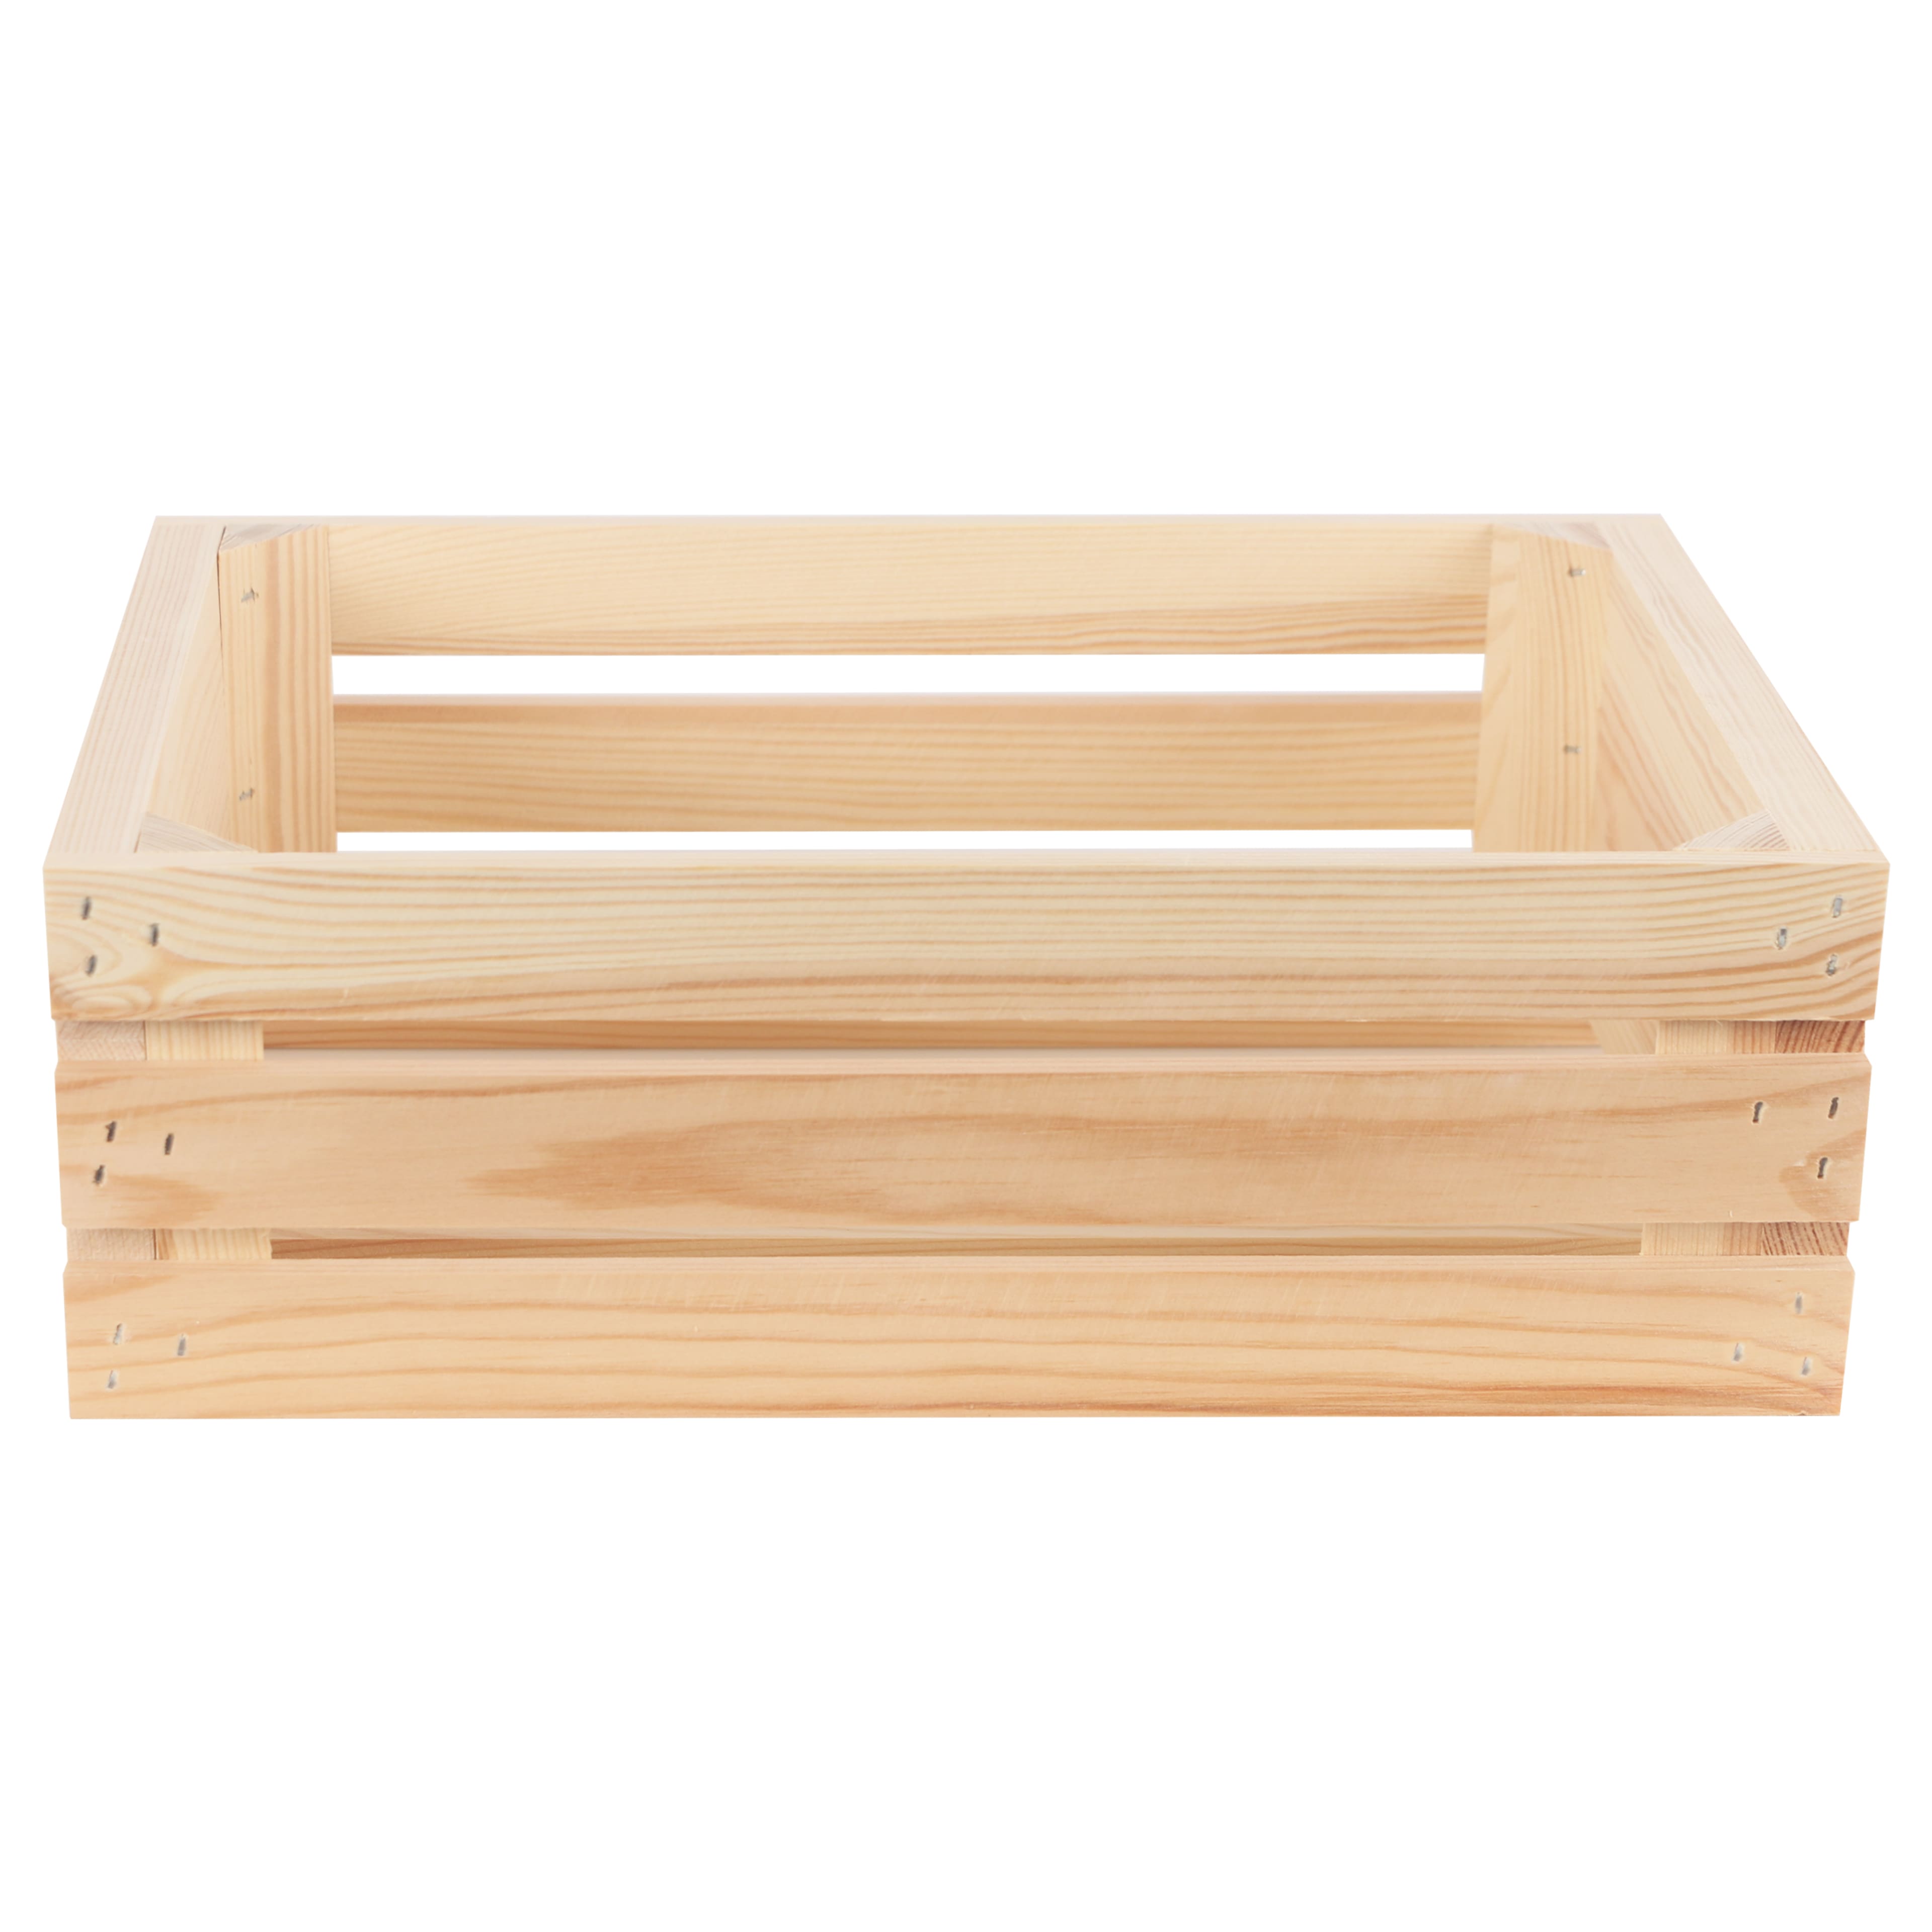 Unfinished Wood Box with Hinged Lid, Wooden Jewelry Box (10.75 x 8 x 5.75  In)